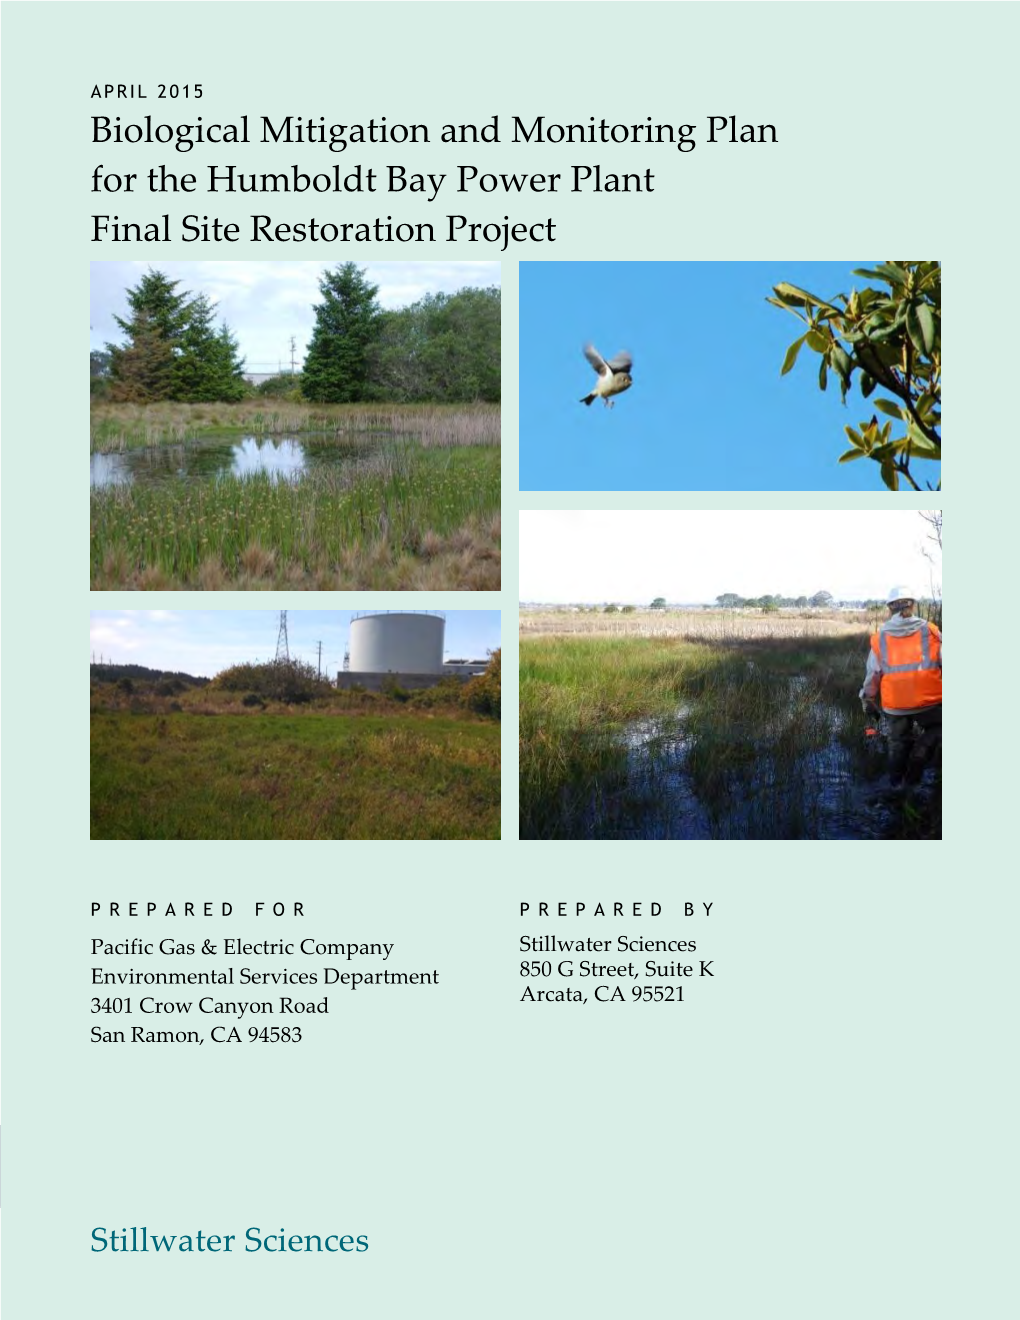 Biological Mitigation and Monitoring Plan for the Humboldt Bay Power Plant Final Site Restoration Project